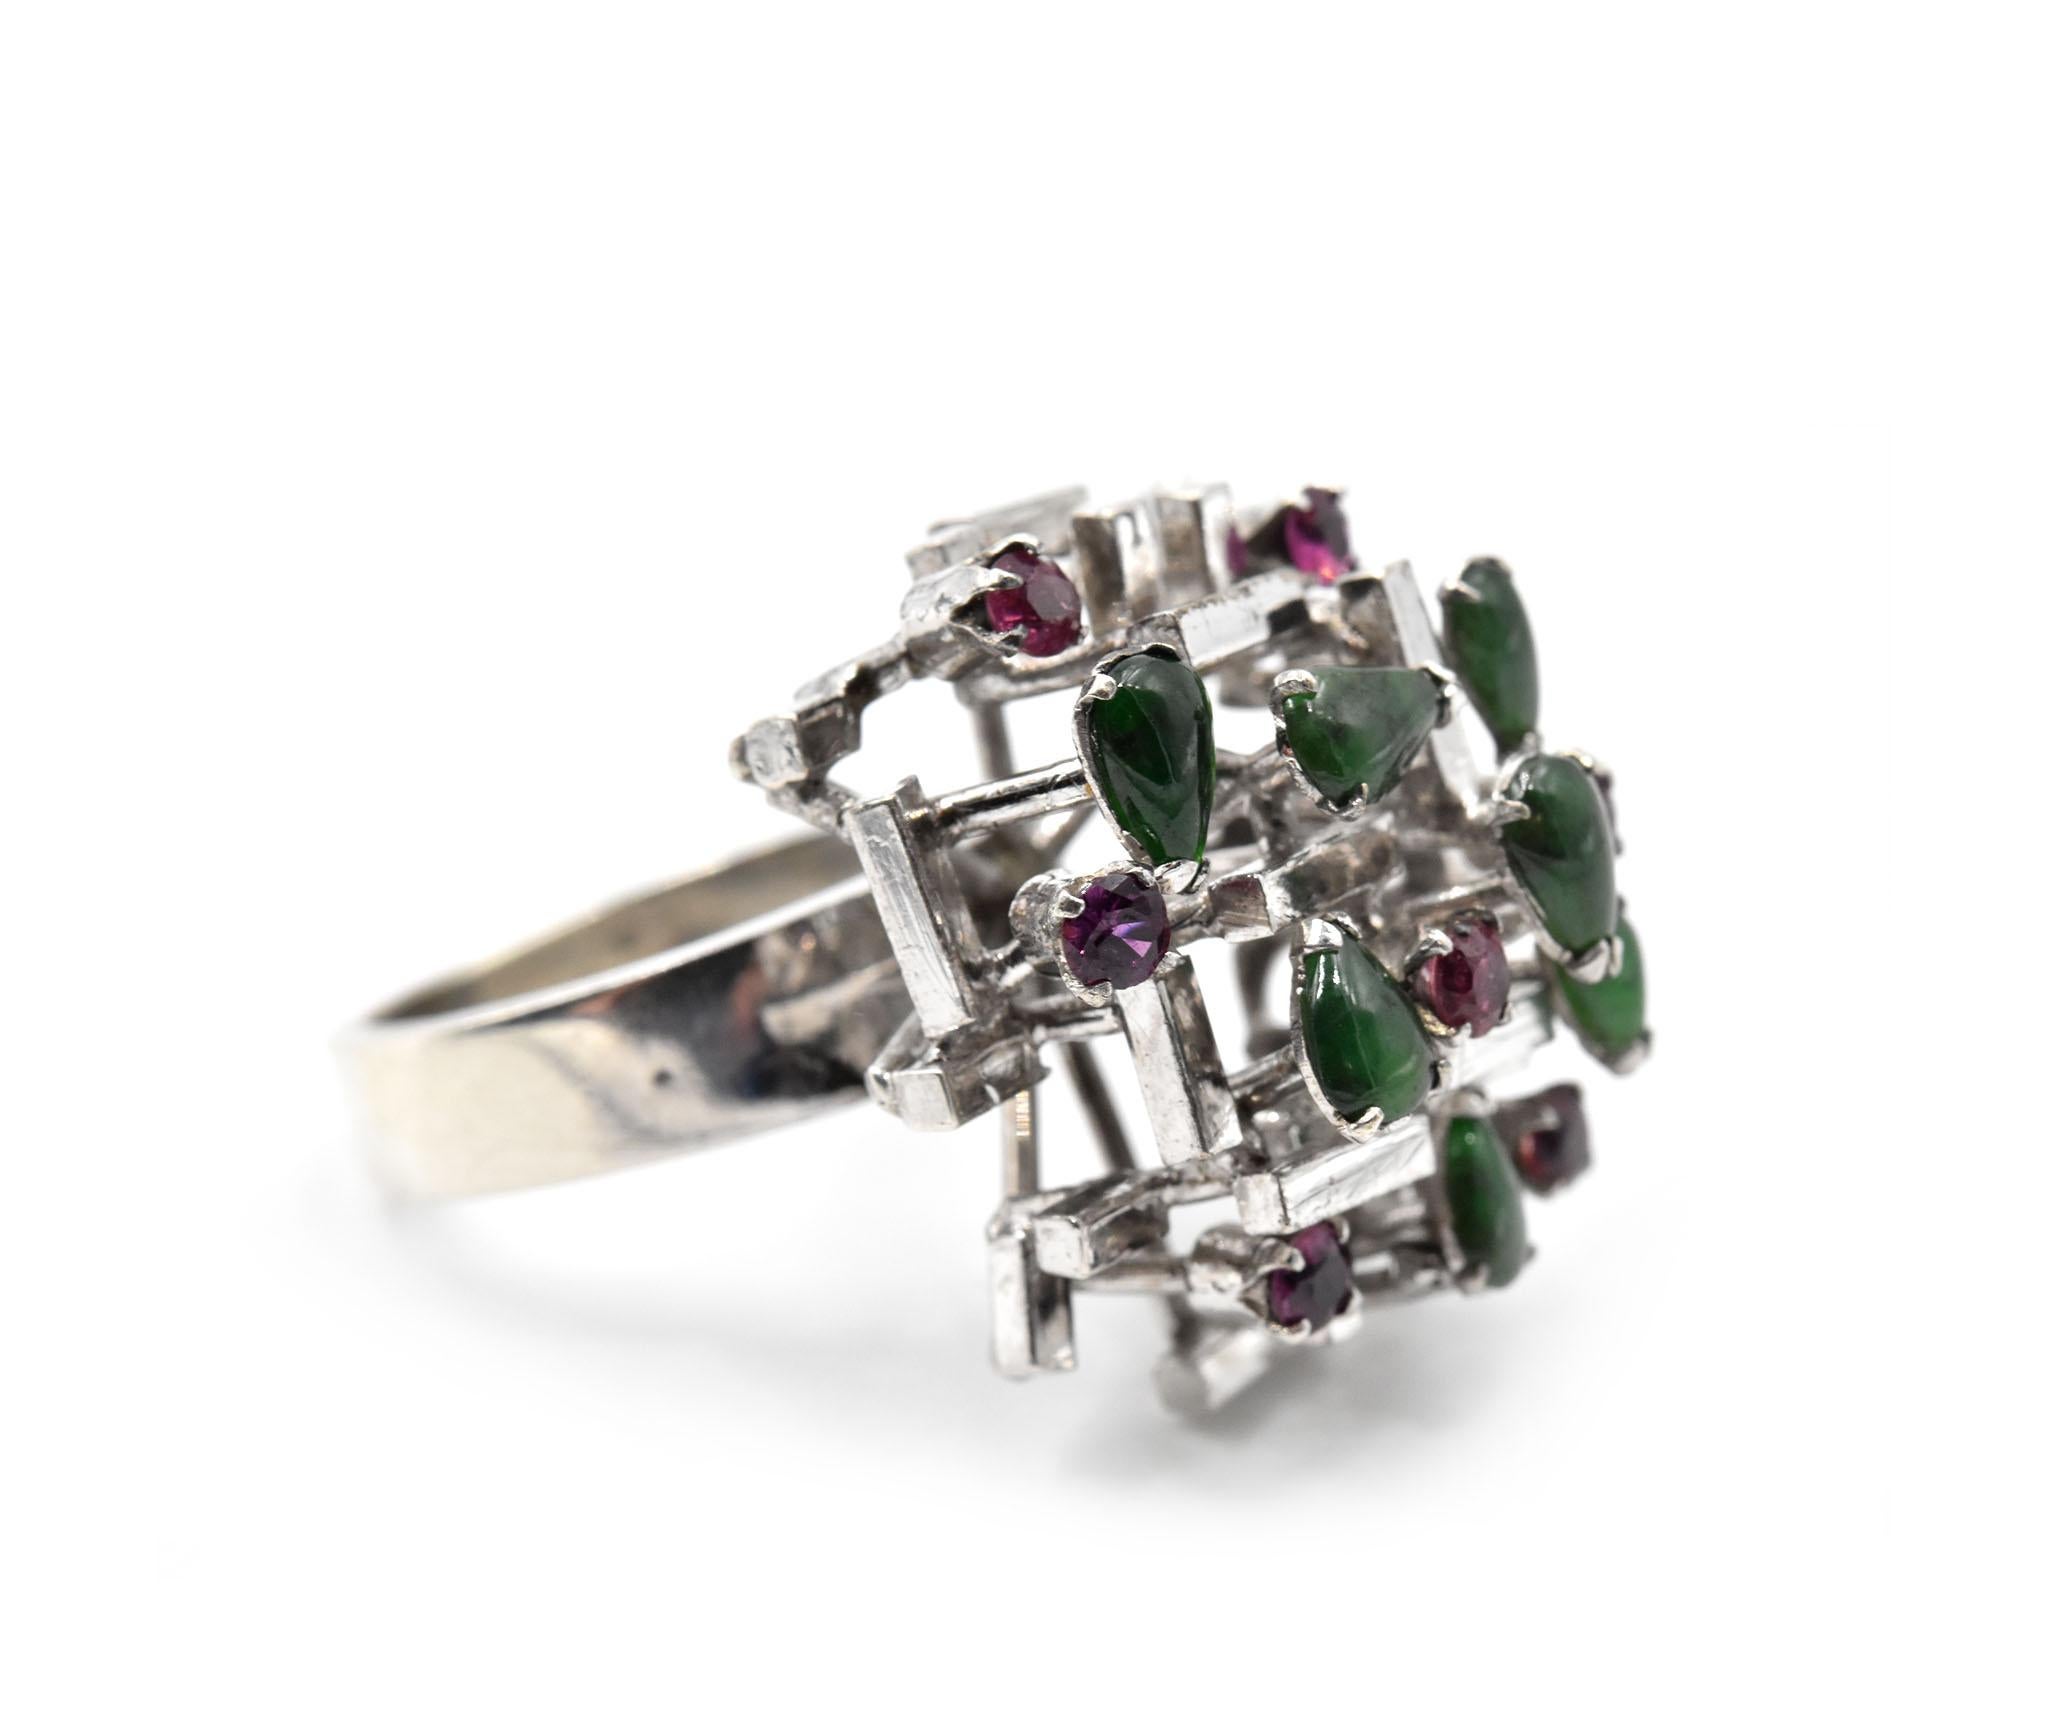 Designer: custom design
Material: 14k white gold
Circa: 1950s
Gemstones: vintage jade & cabochon cut ruby
Ring Size: 5 1/2 (please allow two additional shipping days for sizing requests)
Weight: 9.33 grams
